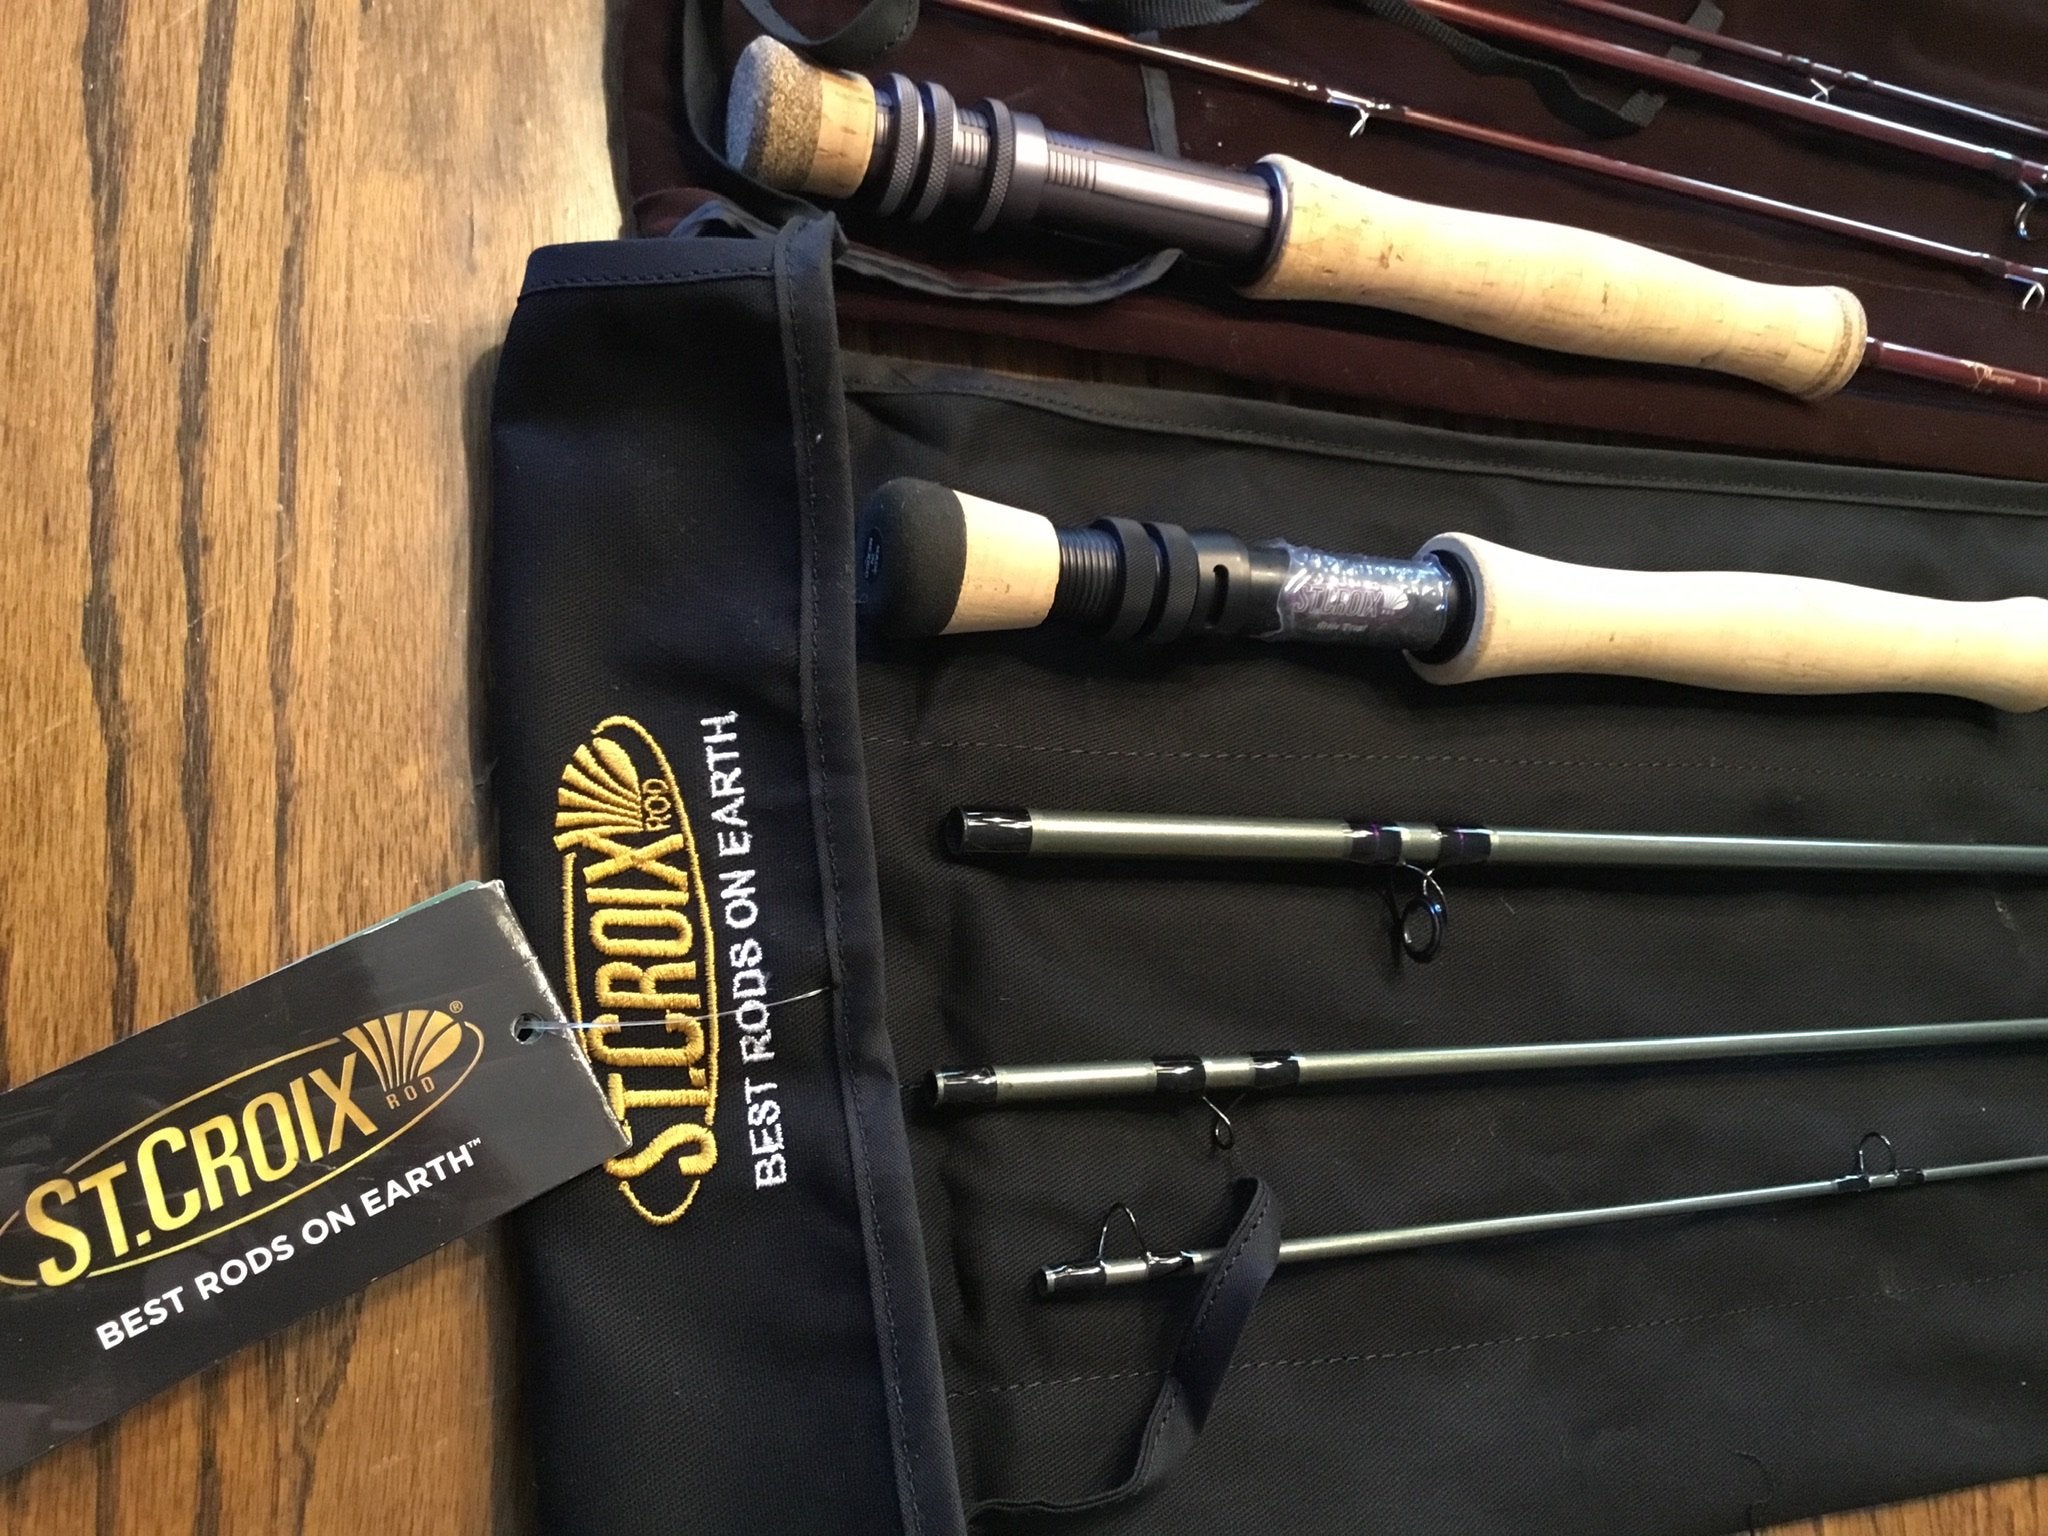 St croix mojo trout fly rod ~ new ~ 7 wt ~ with warranty card. ~ nice rod